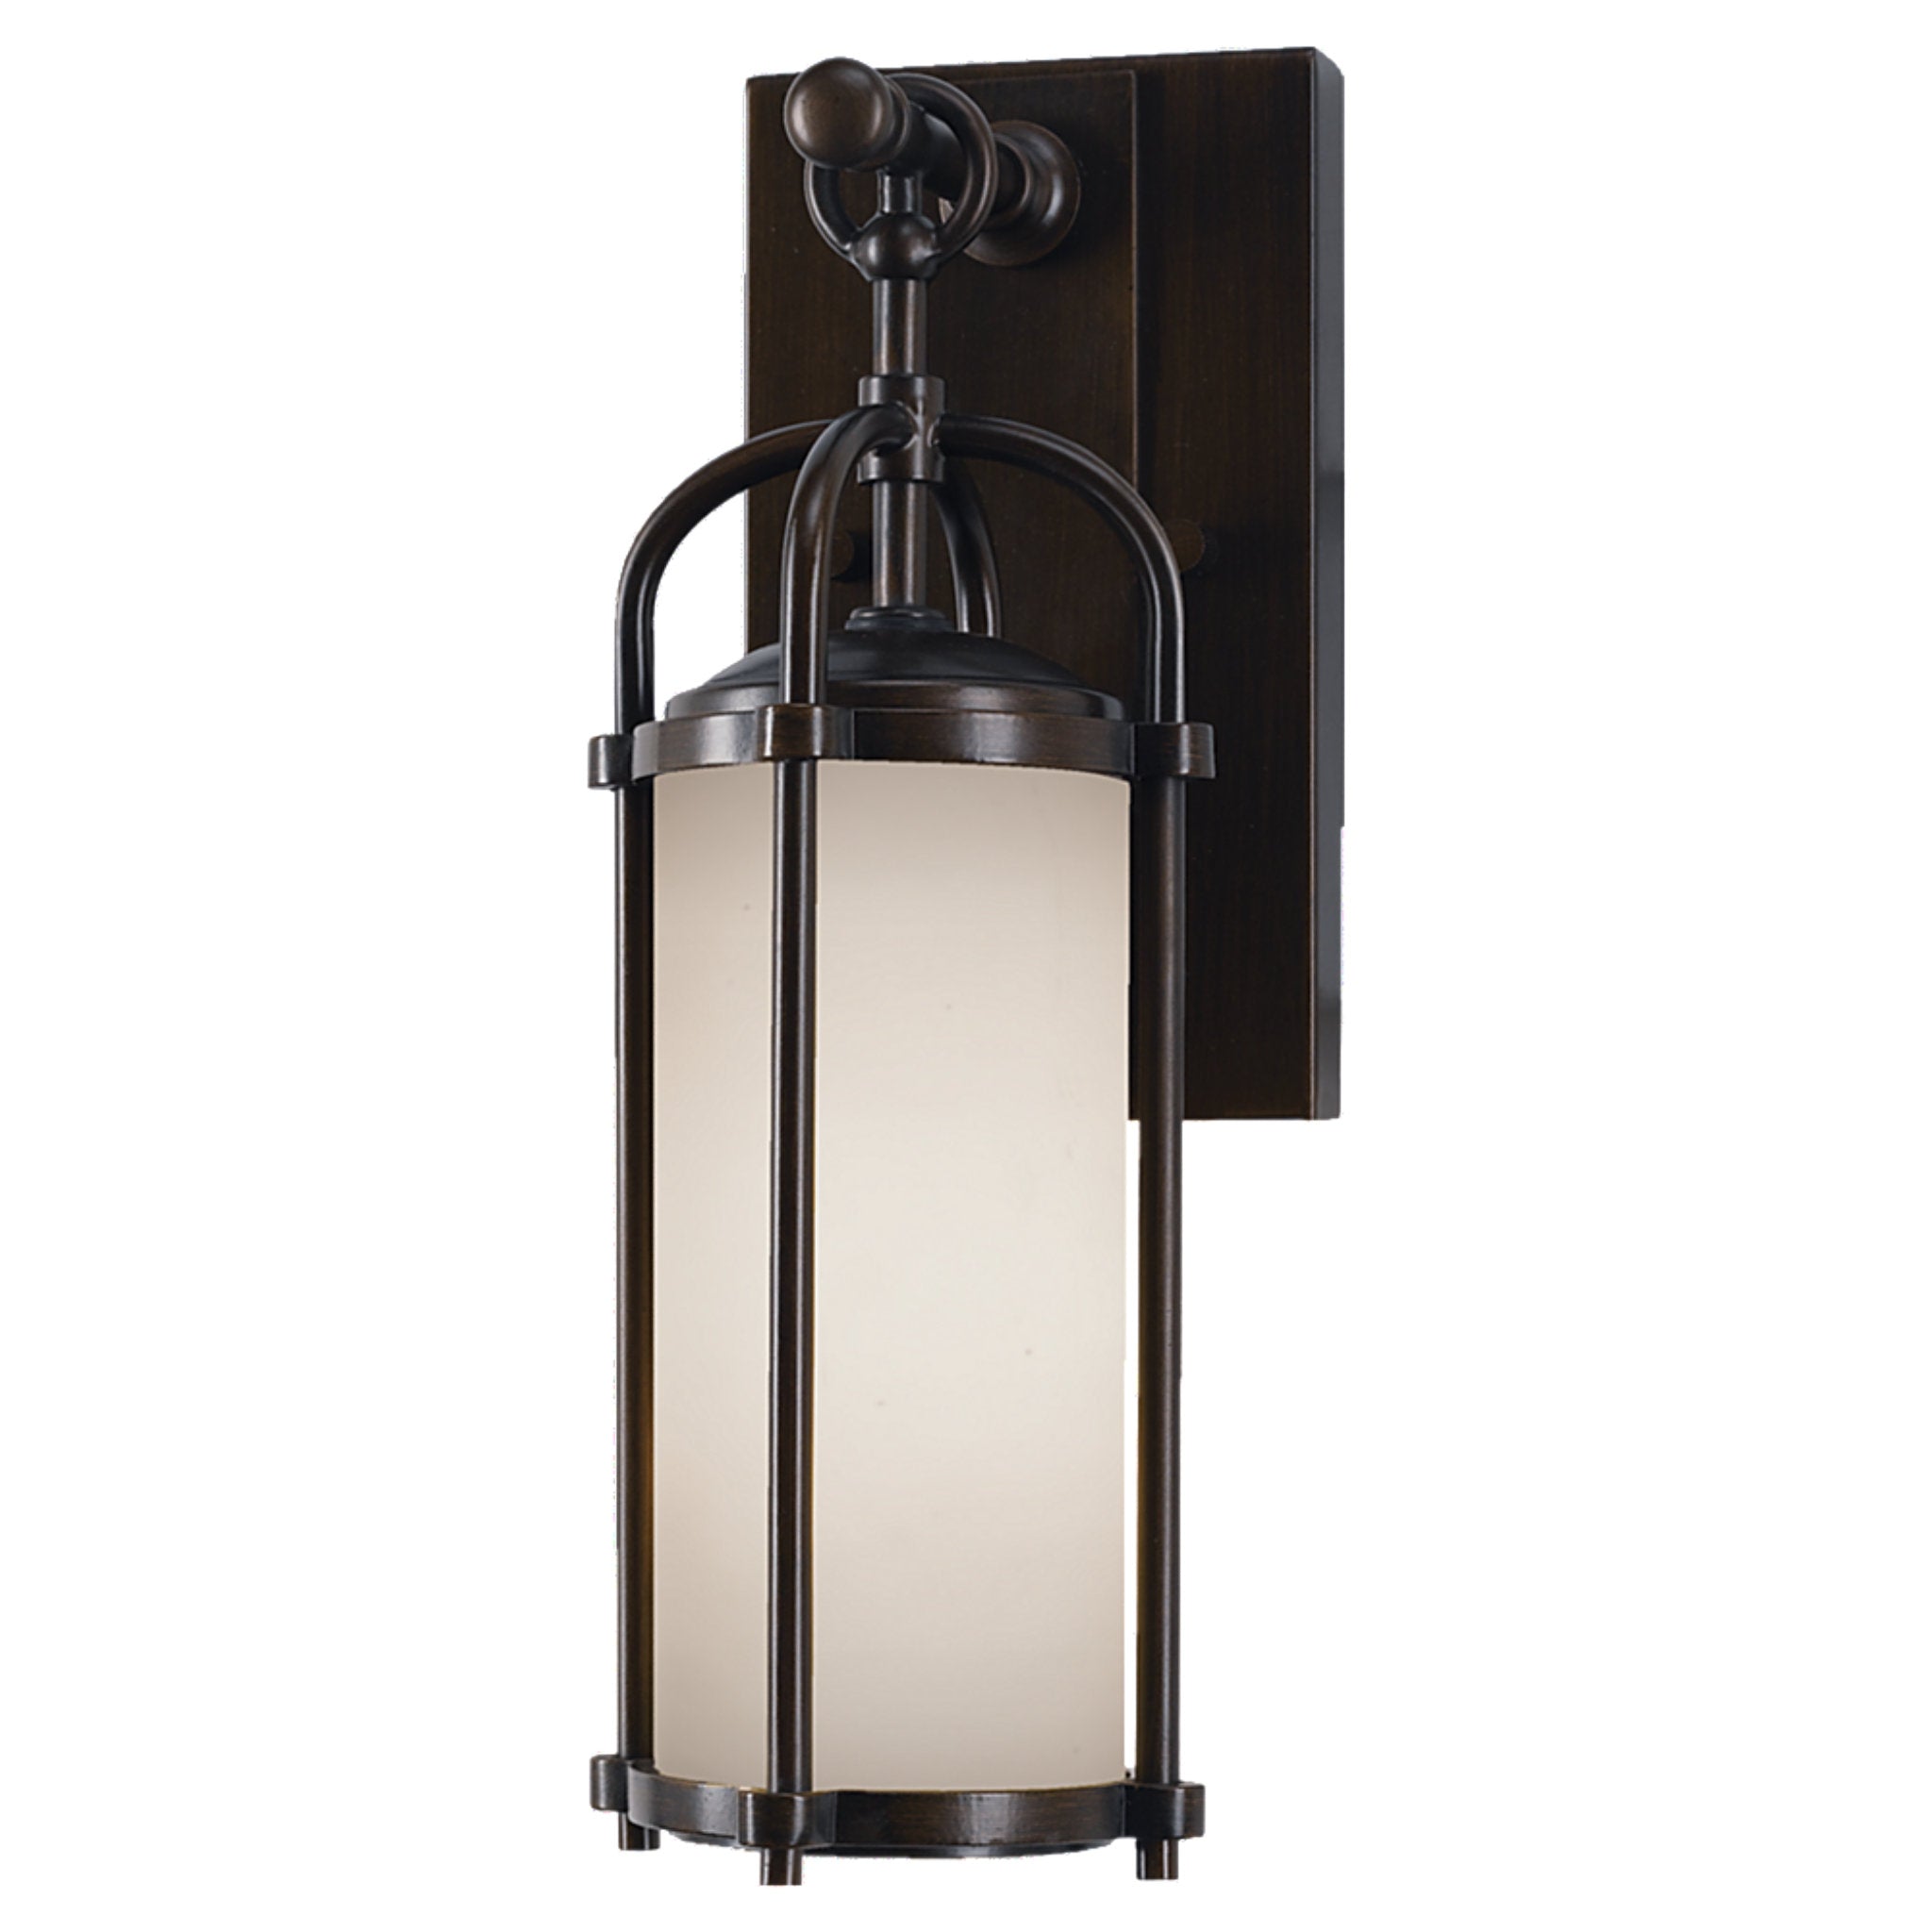 Dakota Extra Small Lantern Transitional Outdoor Fixture 4.75" Width 13.25" Height Aluminum Round Opal Etched Shade in Espresso